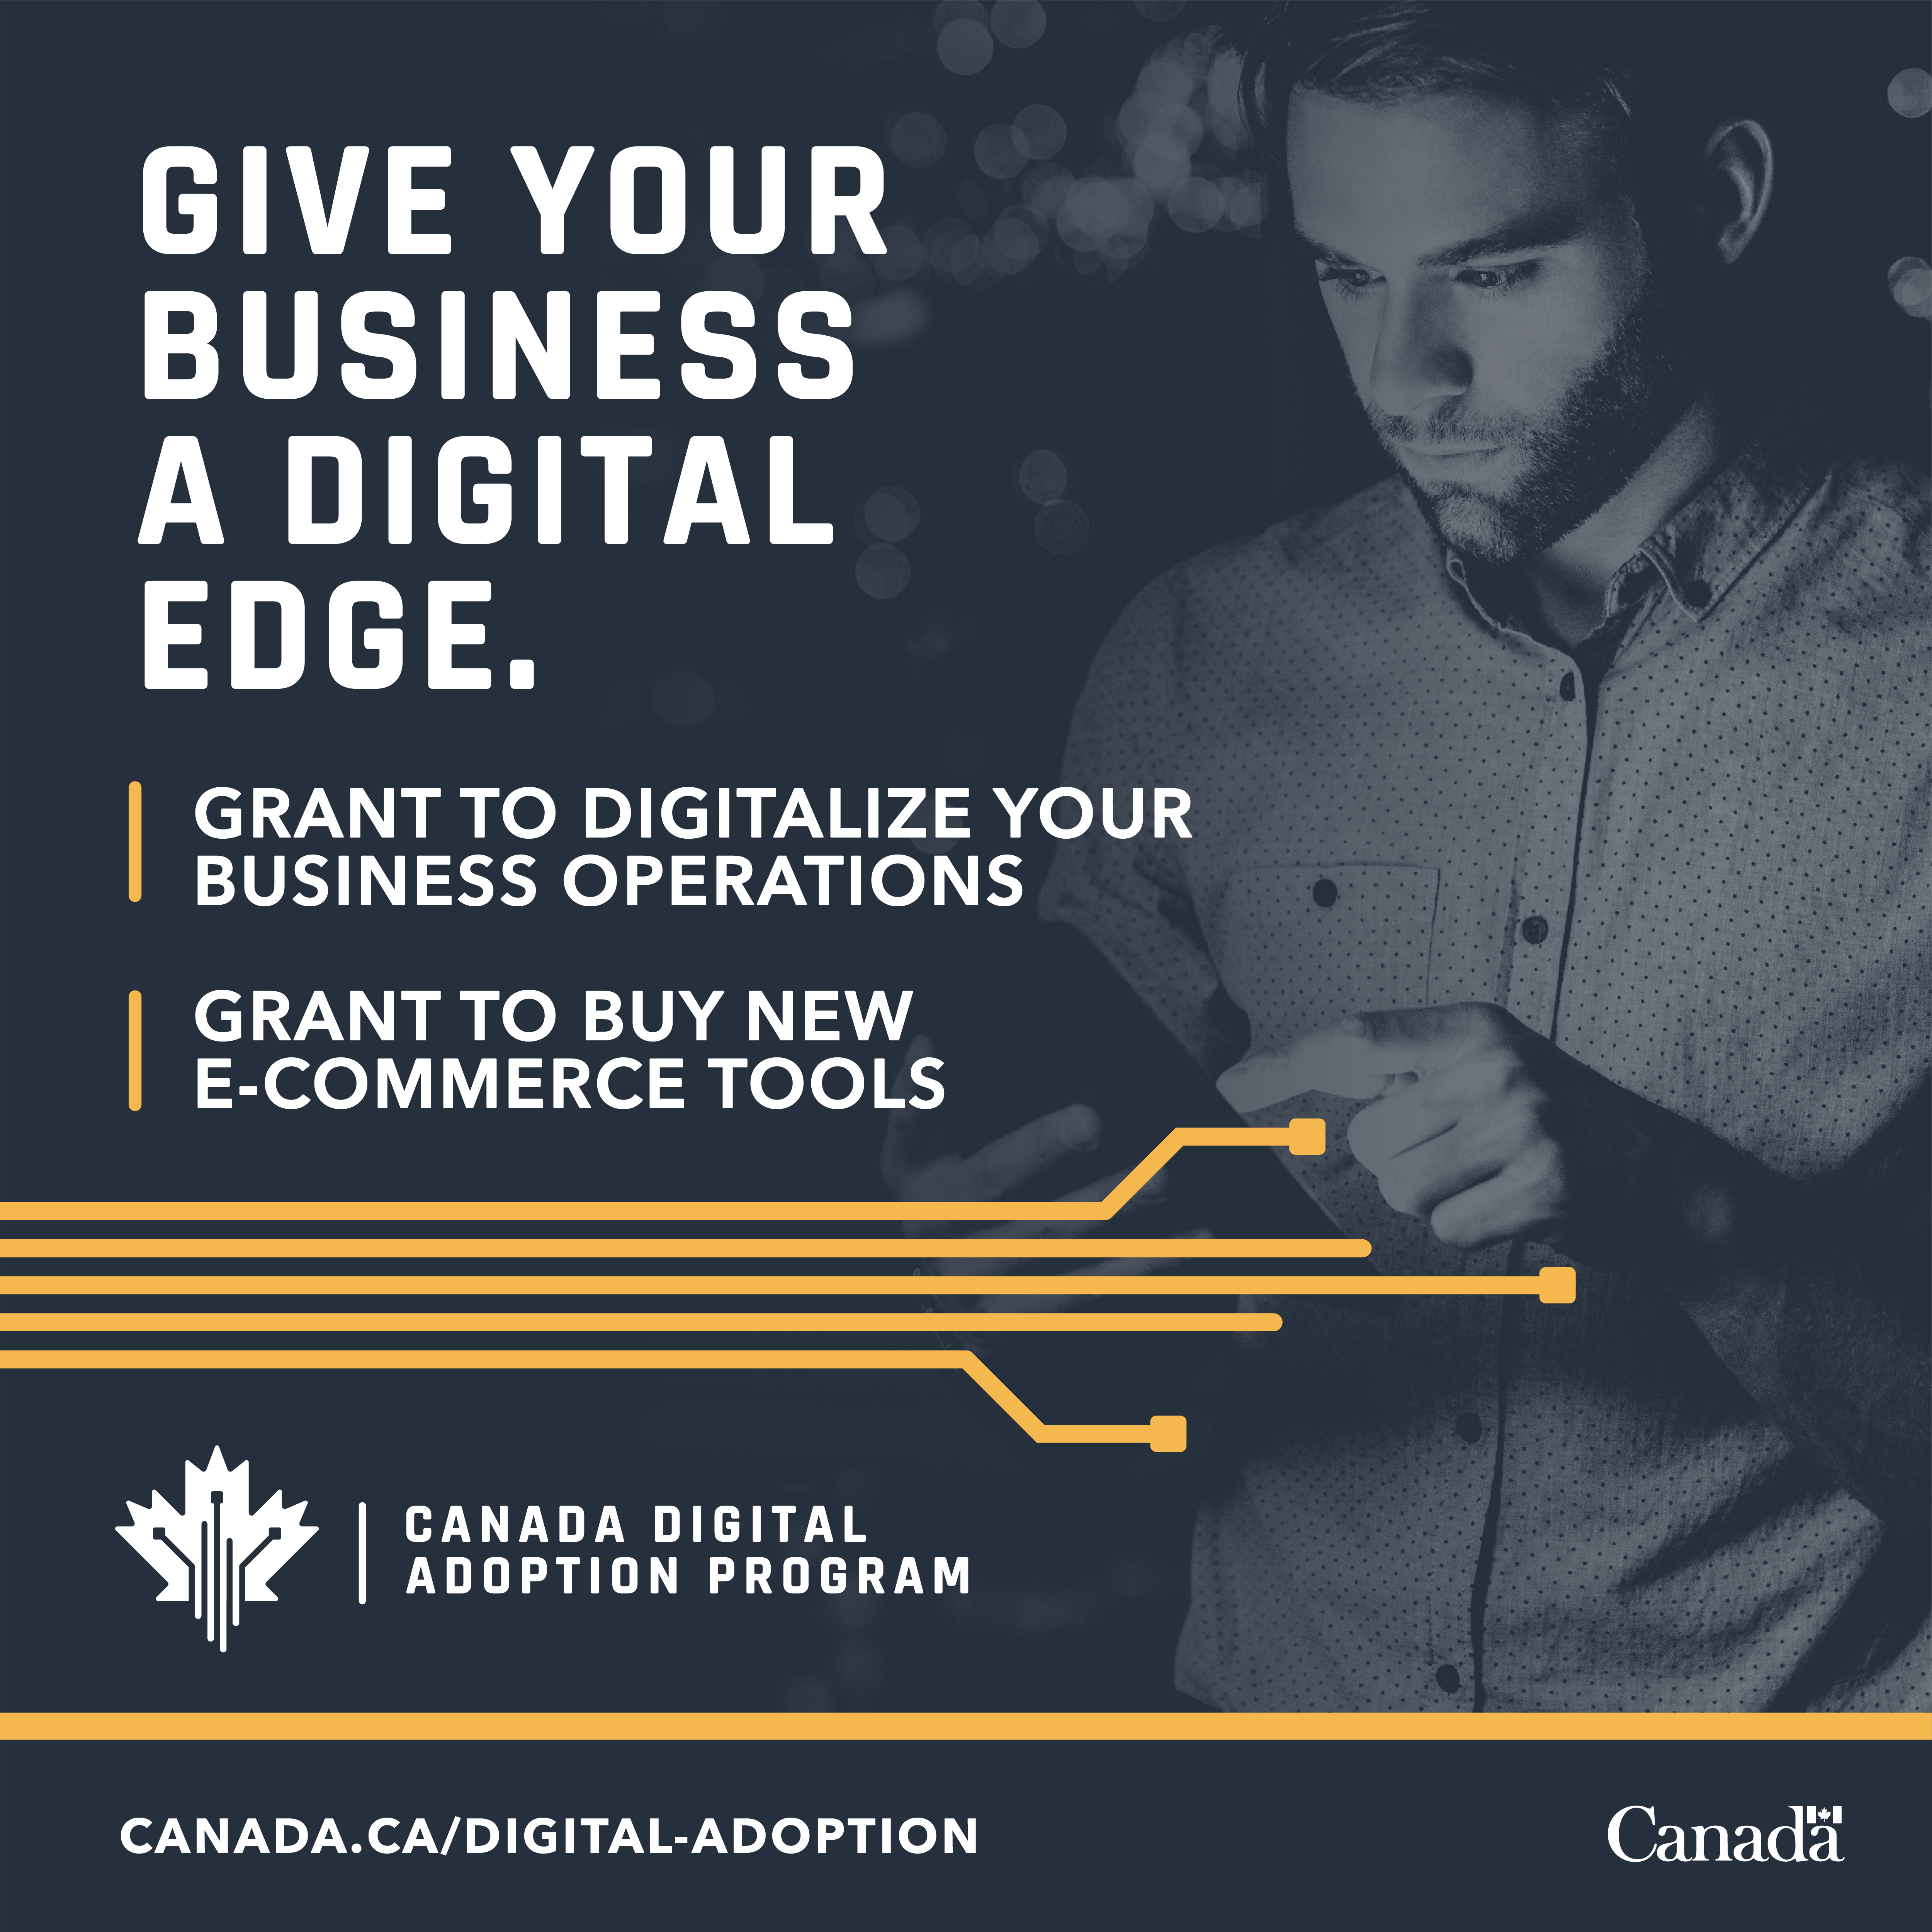 The Canada Digital Adoption Program (CDAP) is offering $4 billion in funding to help small to medium-sized businesses modernize through digital transformation.